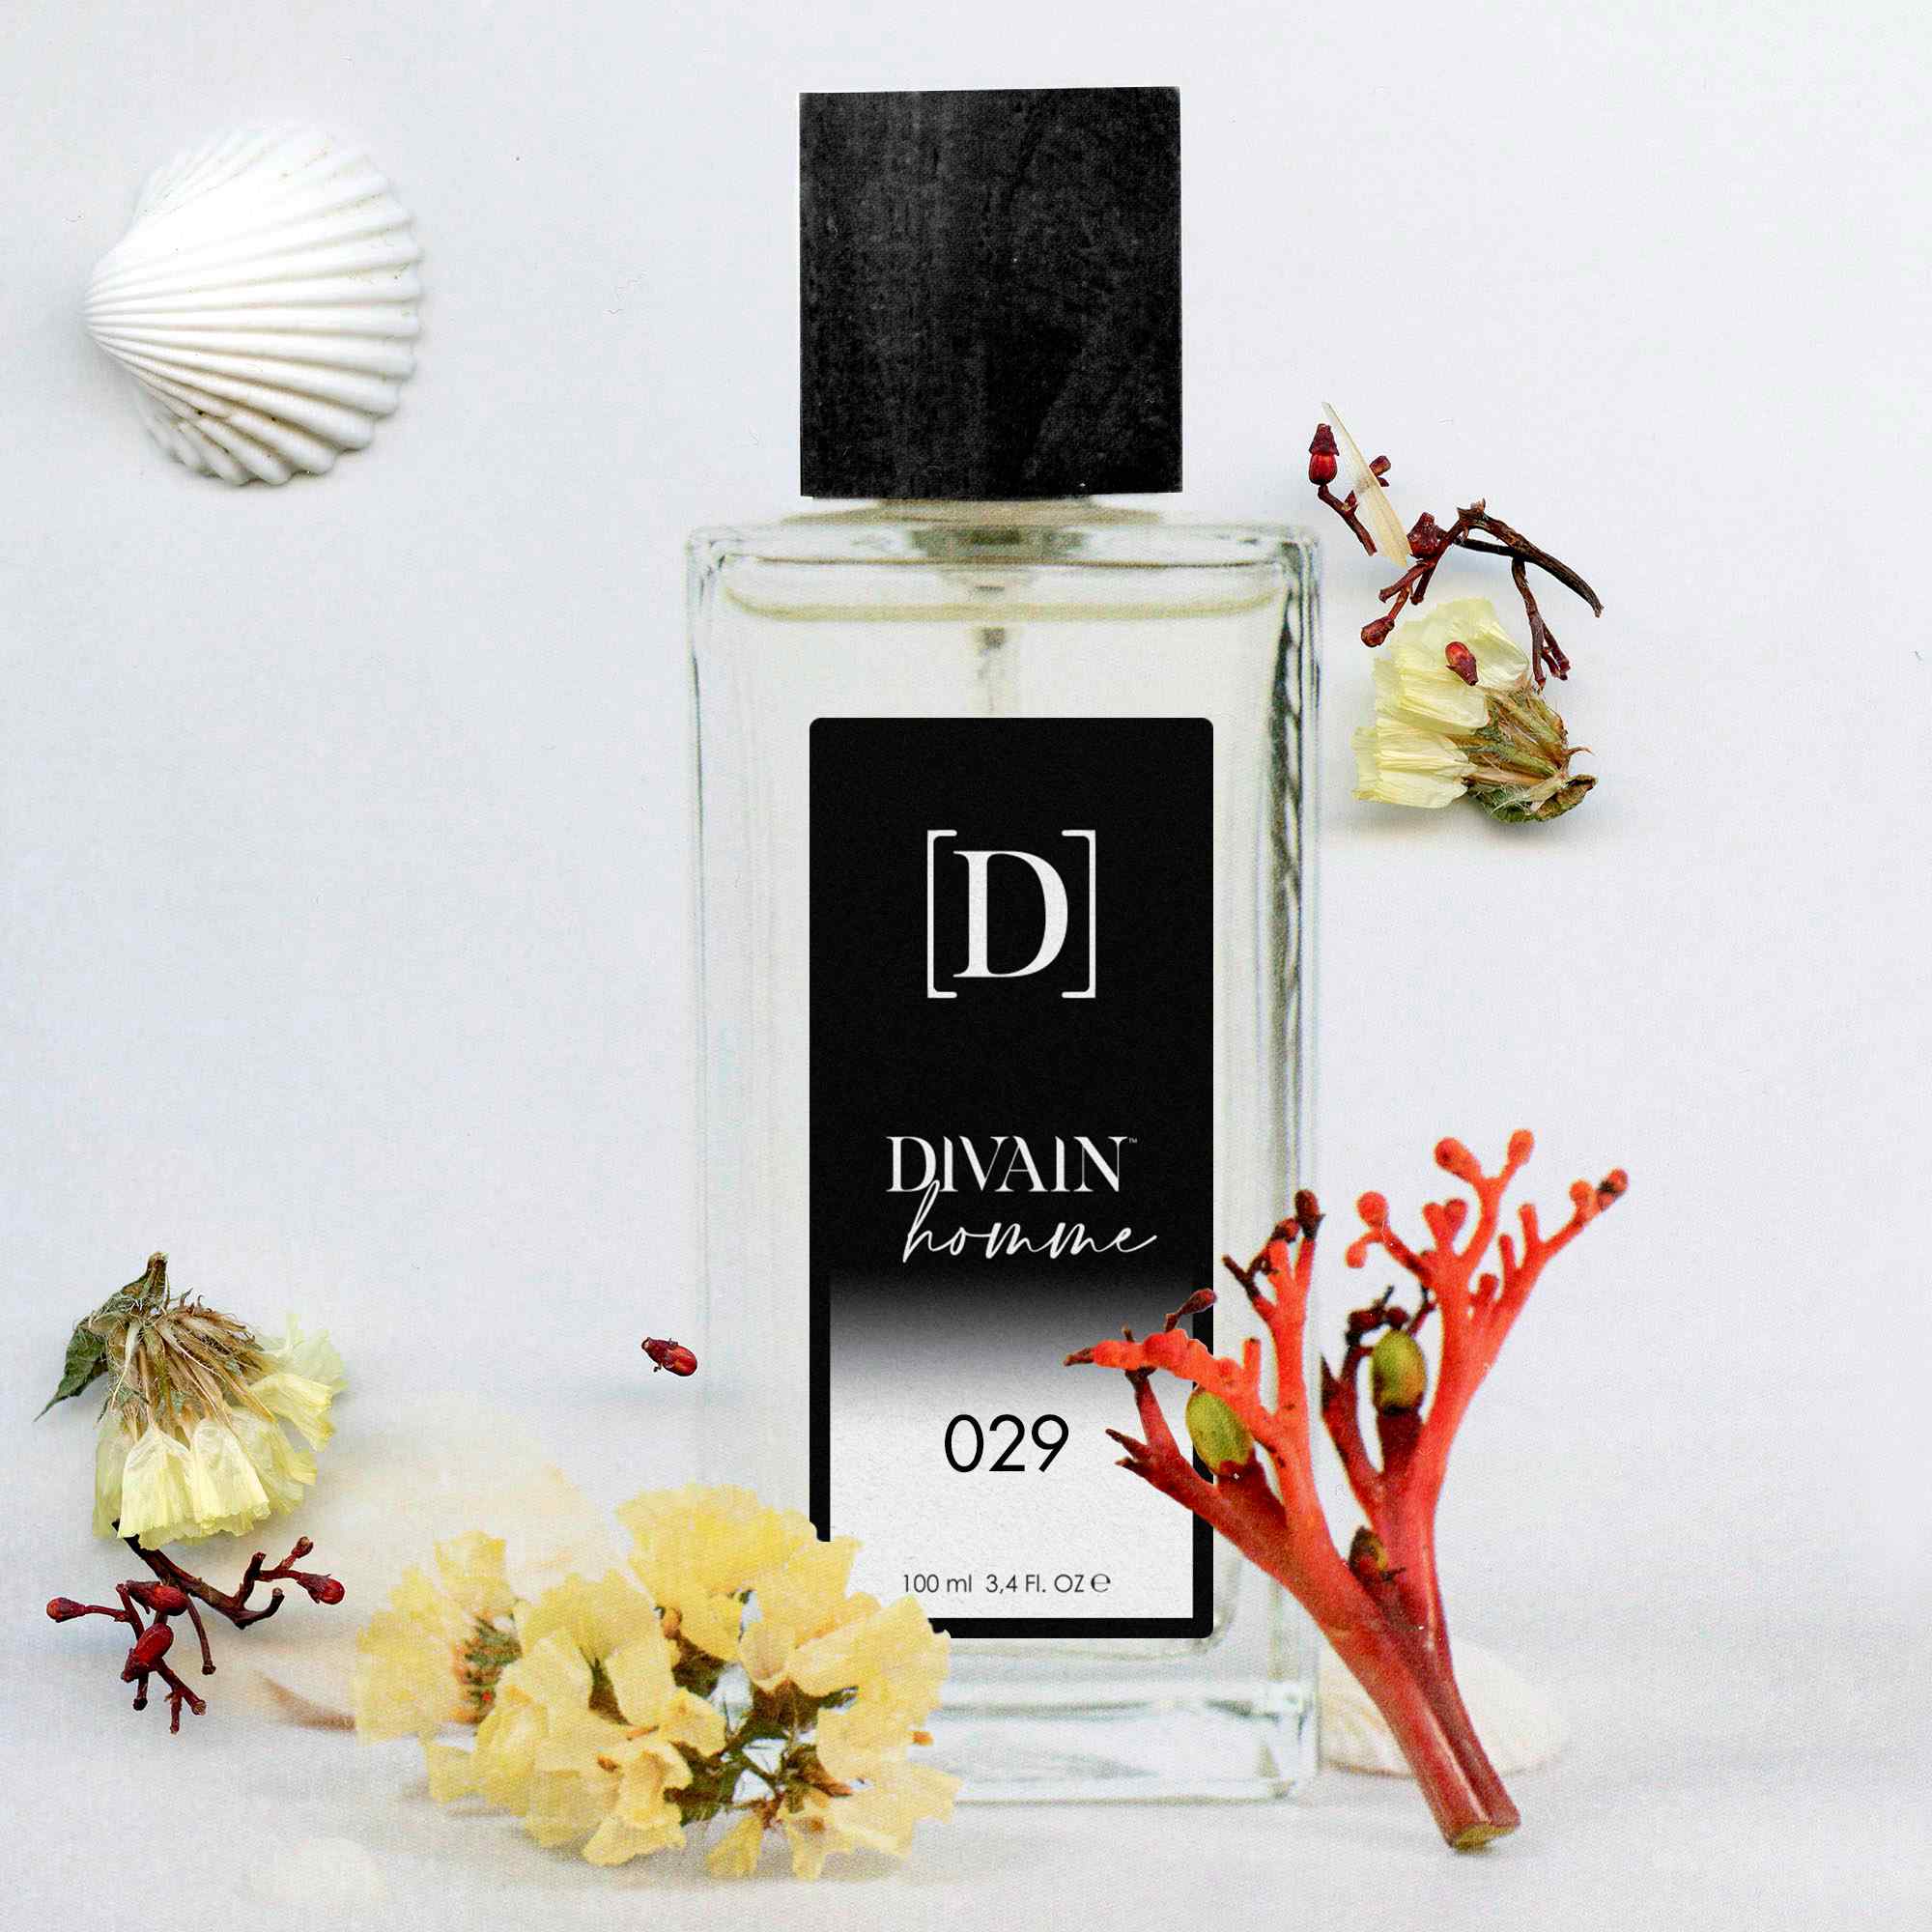 Selection of the most famous men's perfumes